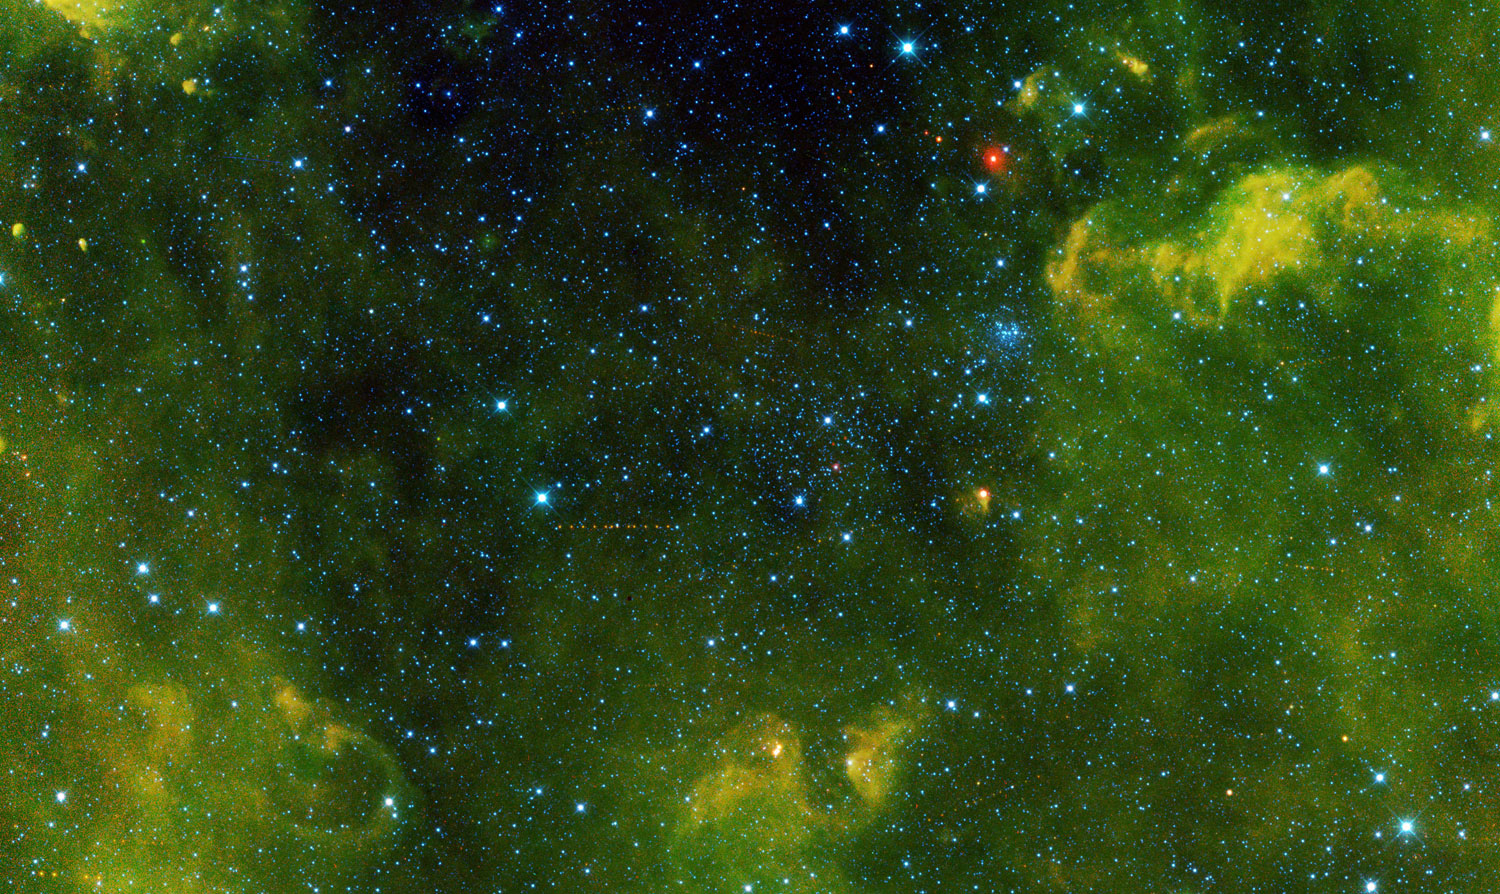 More than 100 asteroids were captured in this view from NASA's Wide-field Infrared Survey Explorer, or WISE, released on Jan. 23, 2014, during its primary all-sky survey. The asteroid at center left is called (2415) Ganesa. Clusters of stars can also be seen.